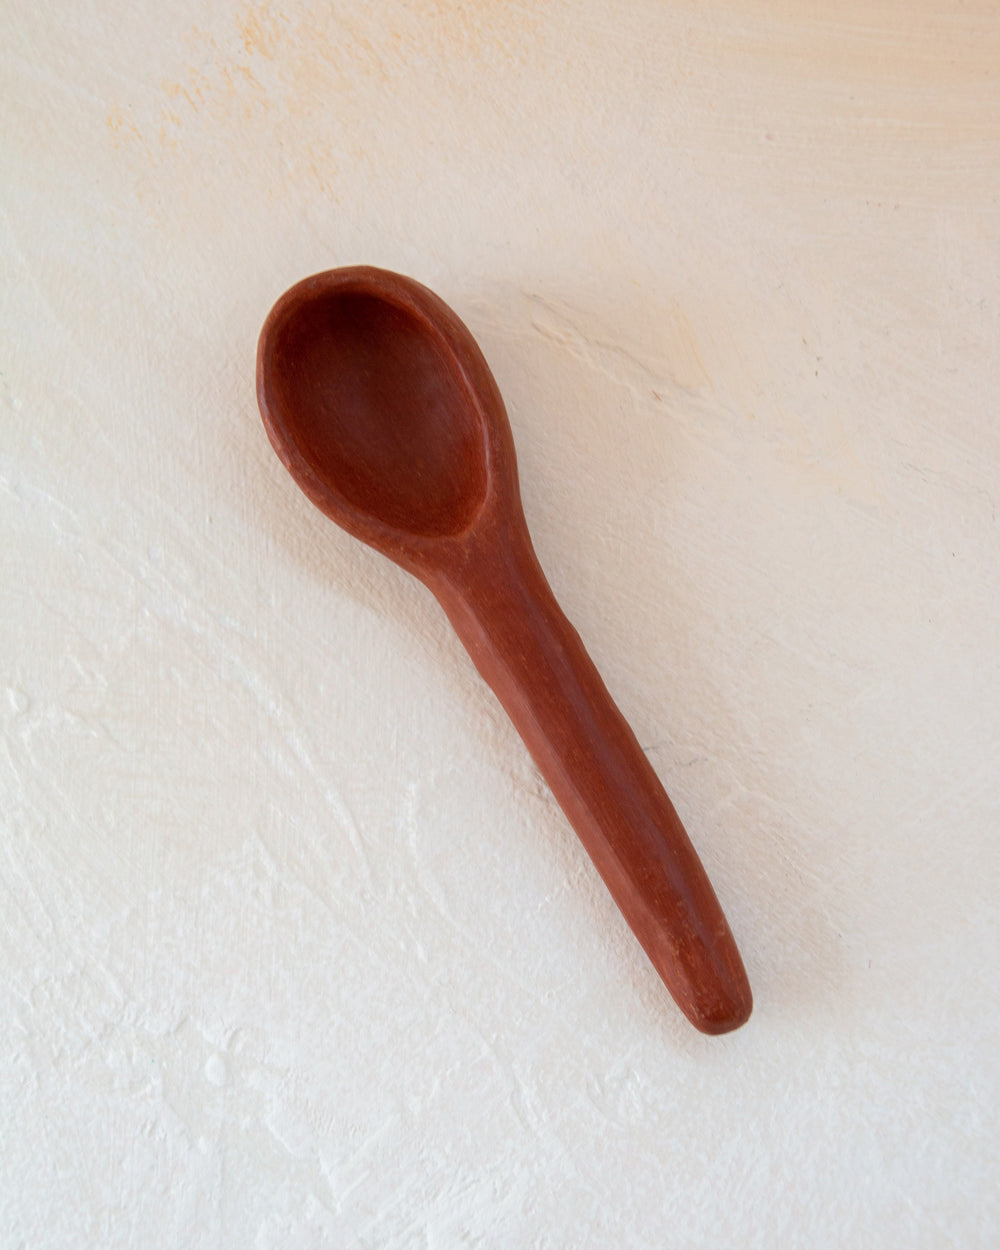 Red Clay Spoon